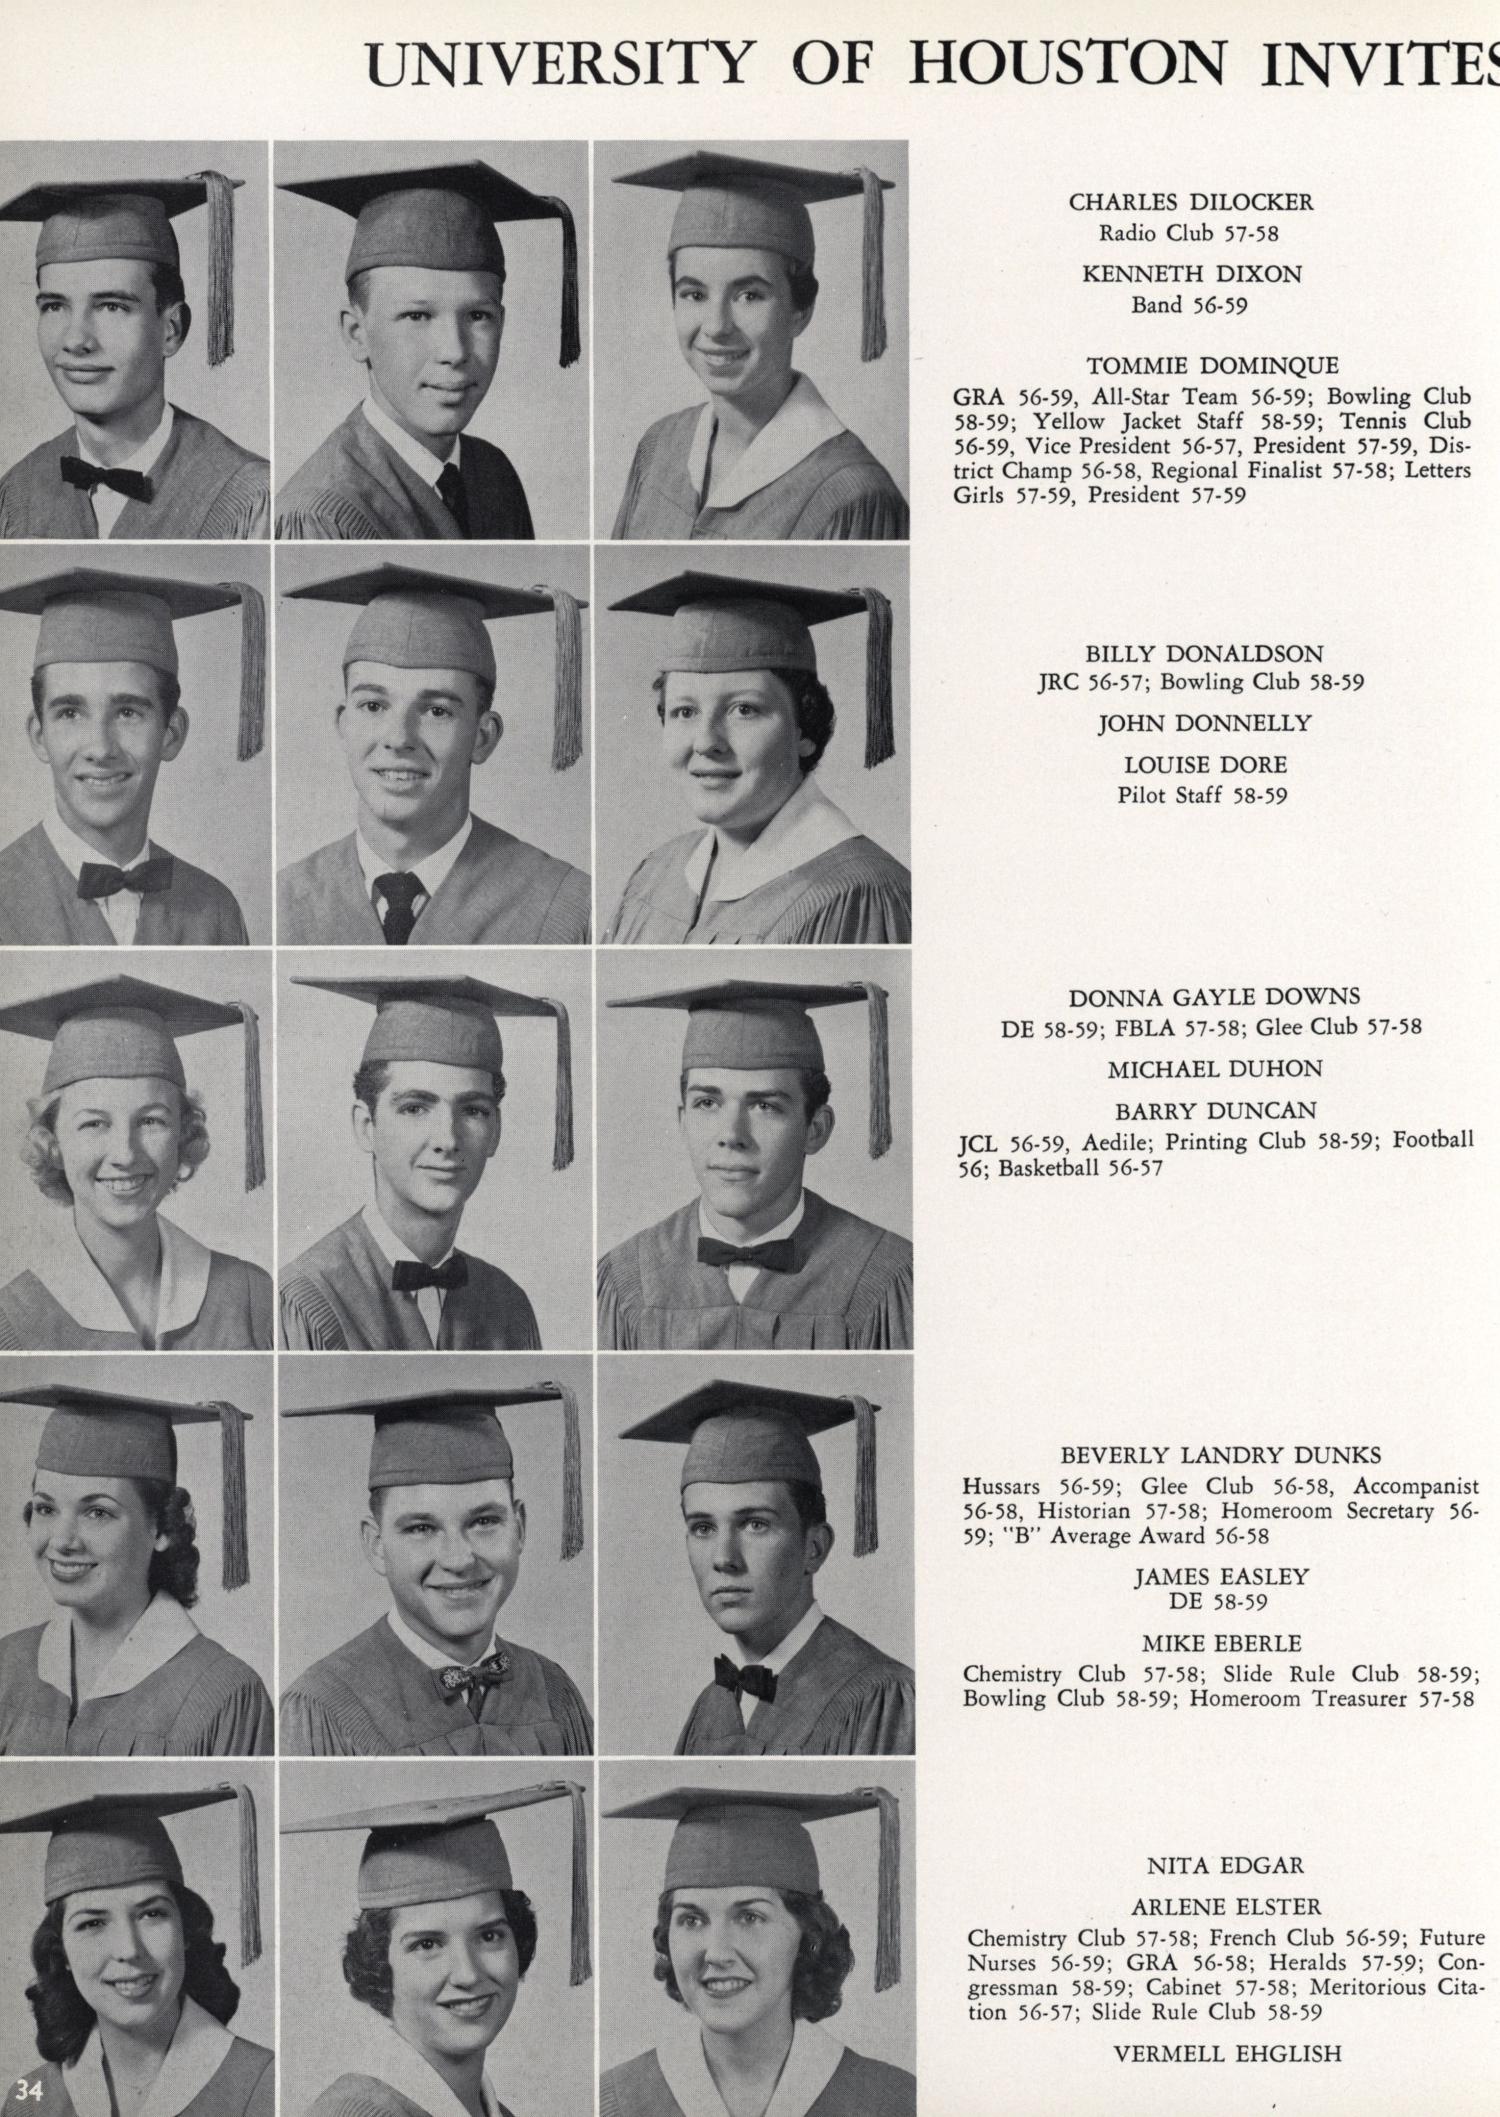 The Yellow Jacket, Yearbook of Thomas Jefferson High School, 1959
                                                
                                                    34
                                                